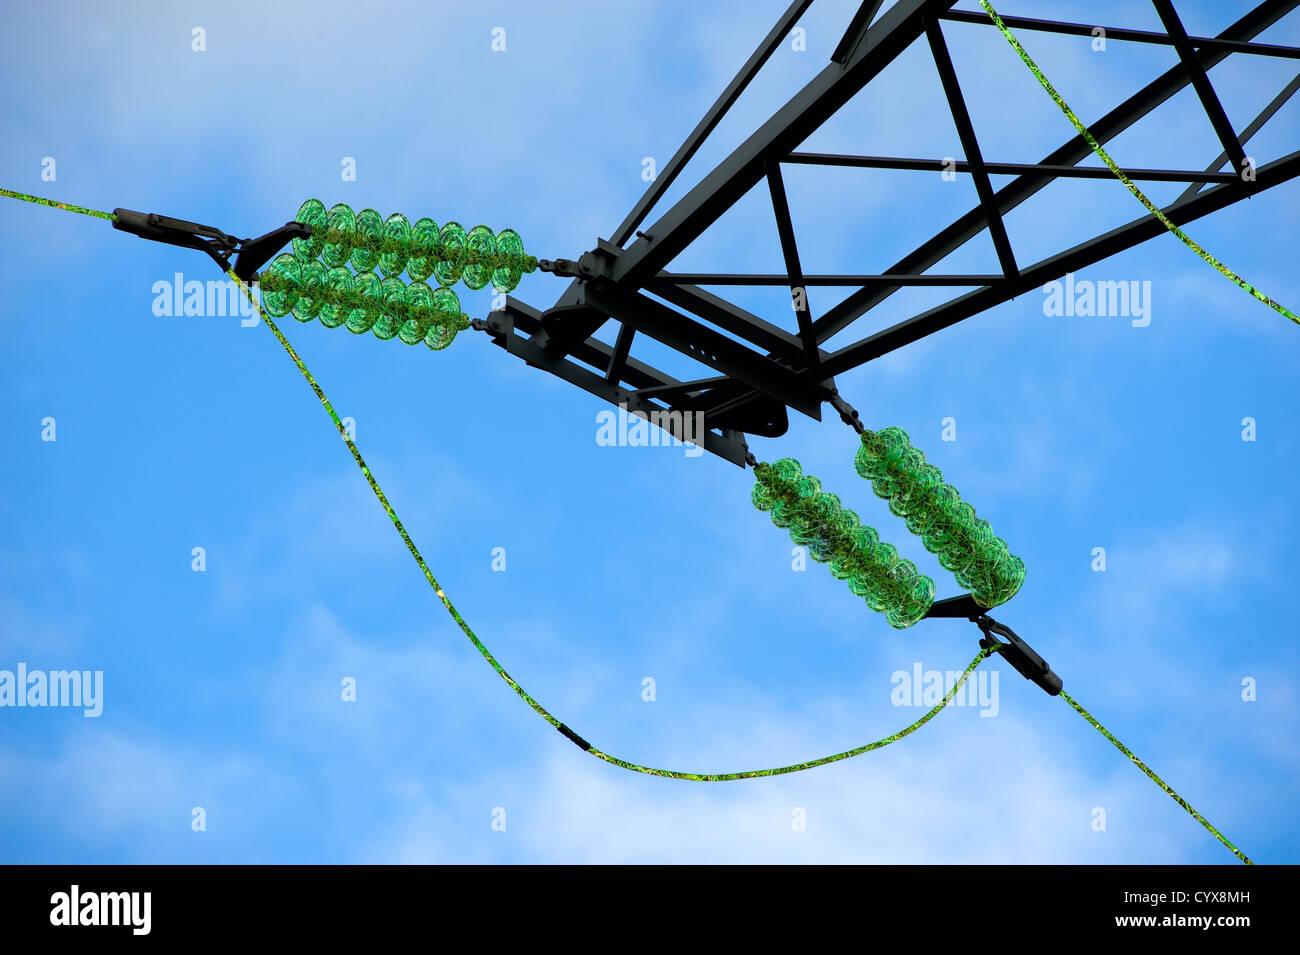 Green energy floating through power cables on an electricity pylon. Stock Photo